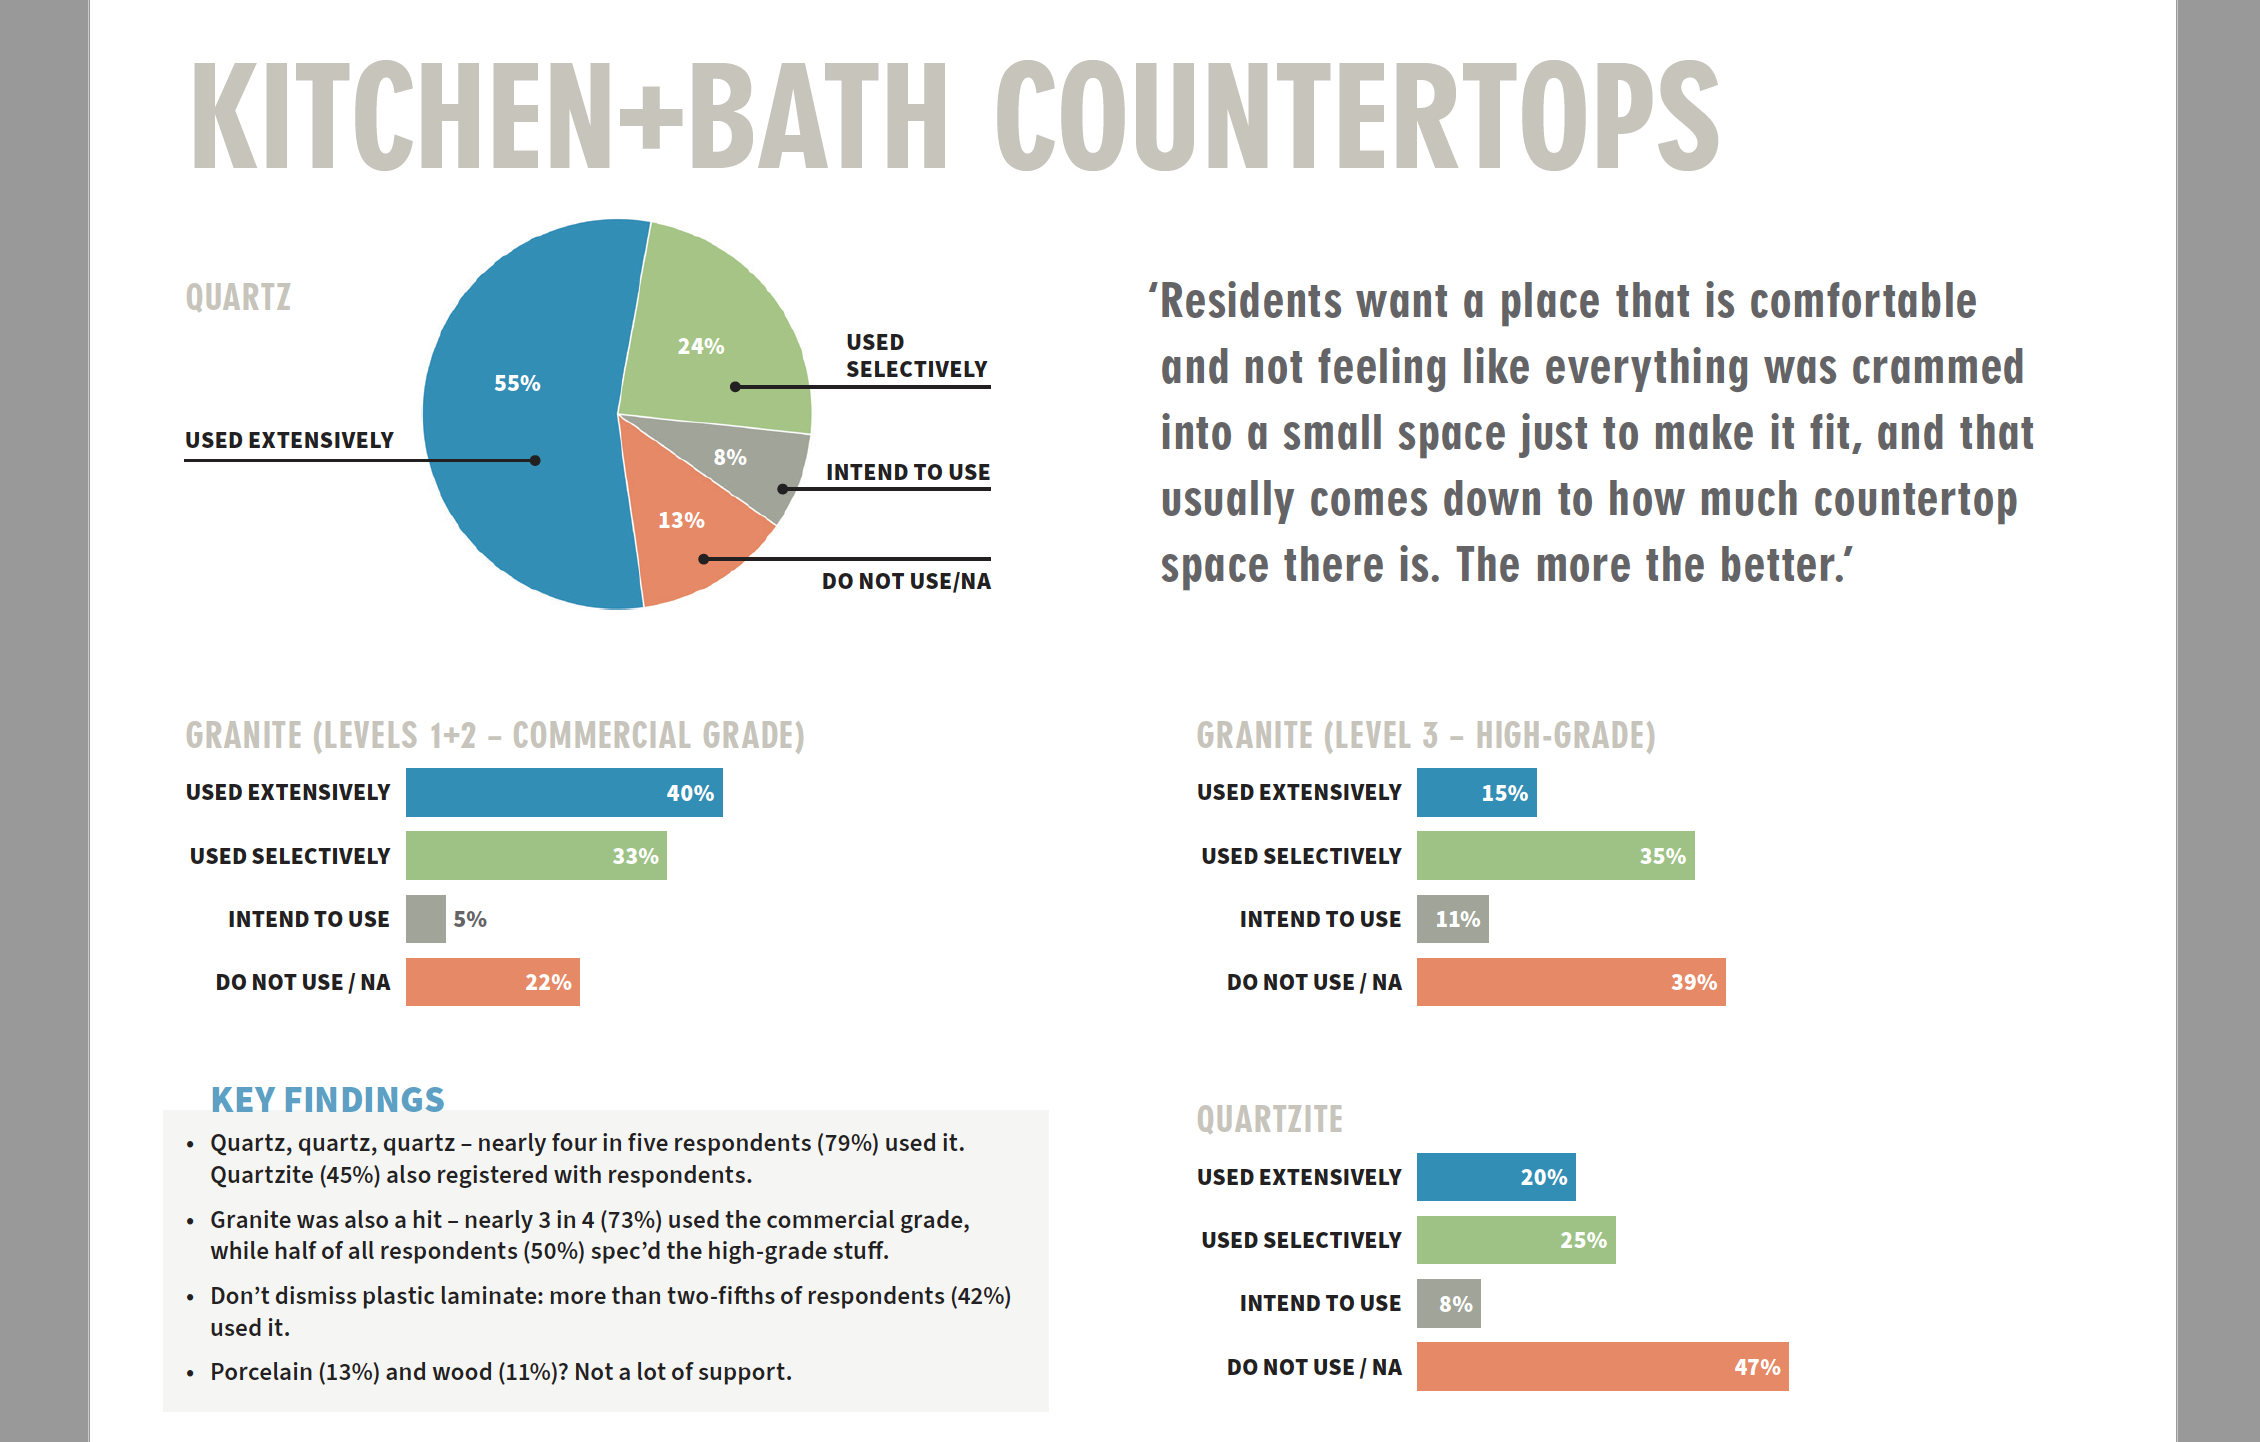 K+B countertops used by respondents